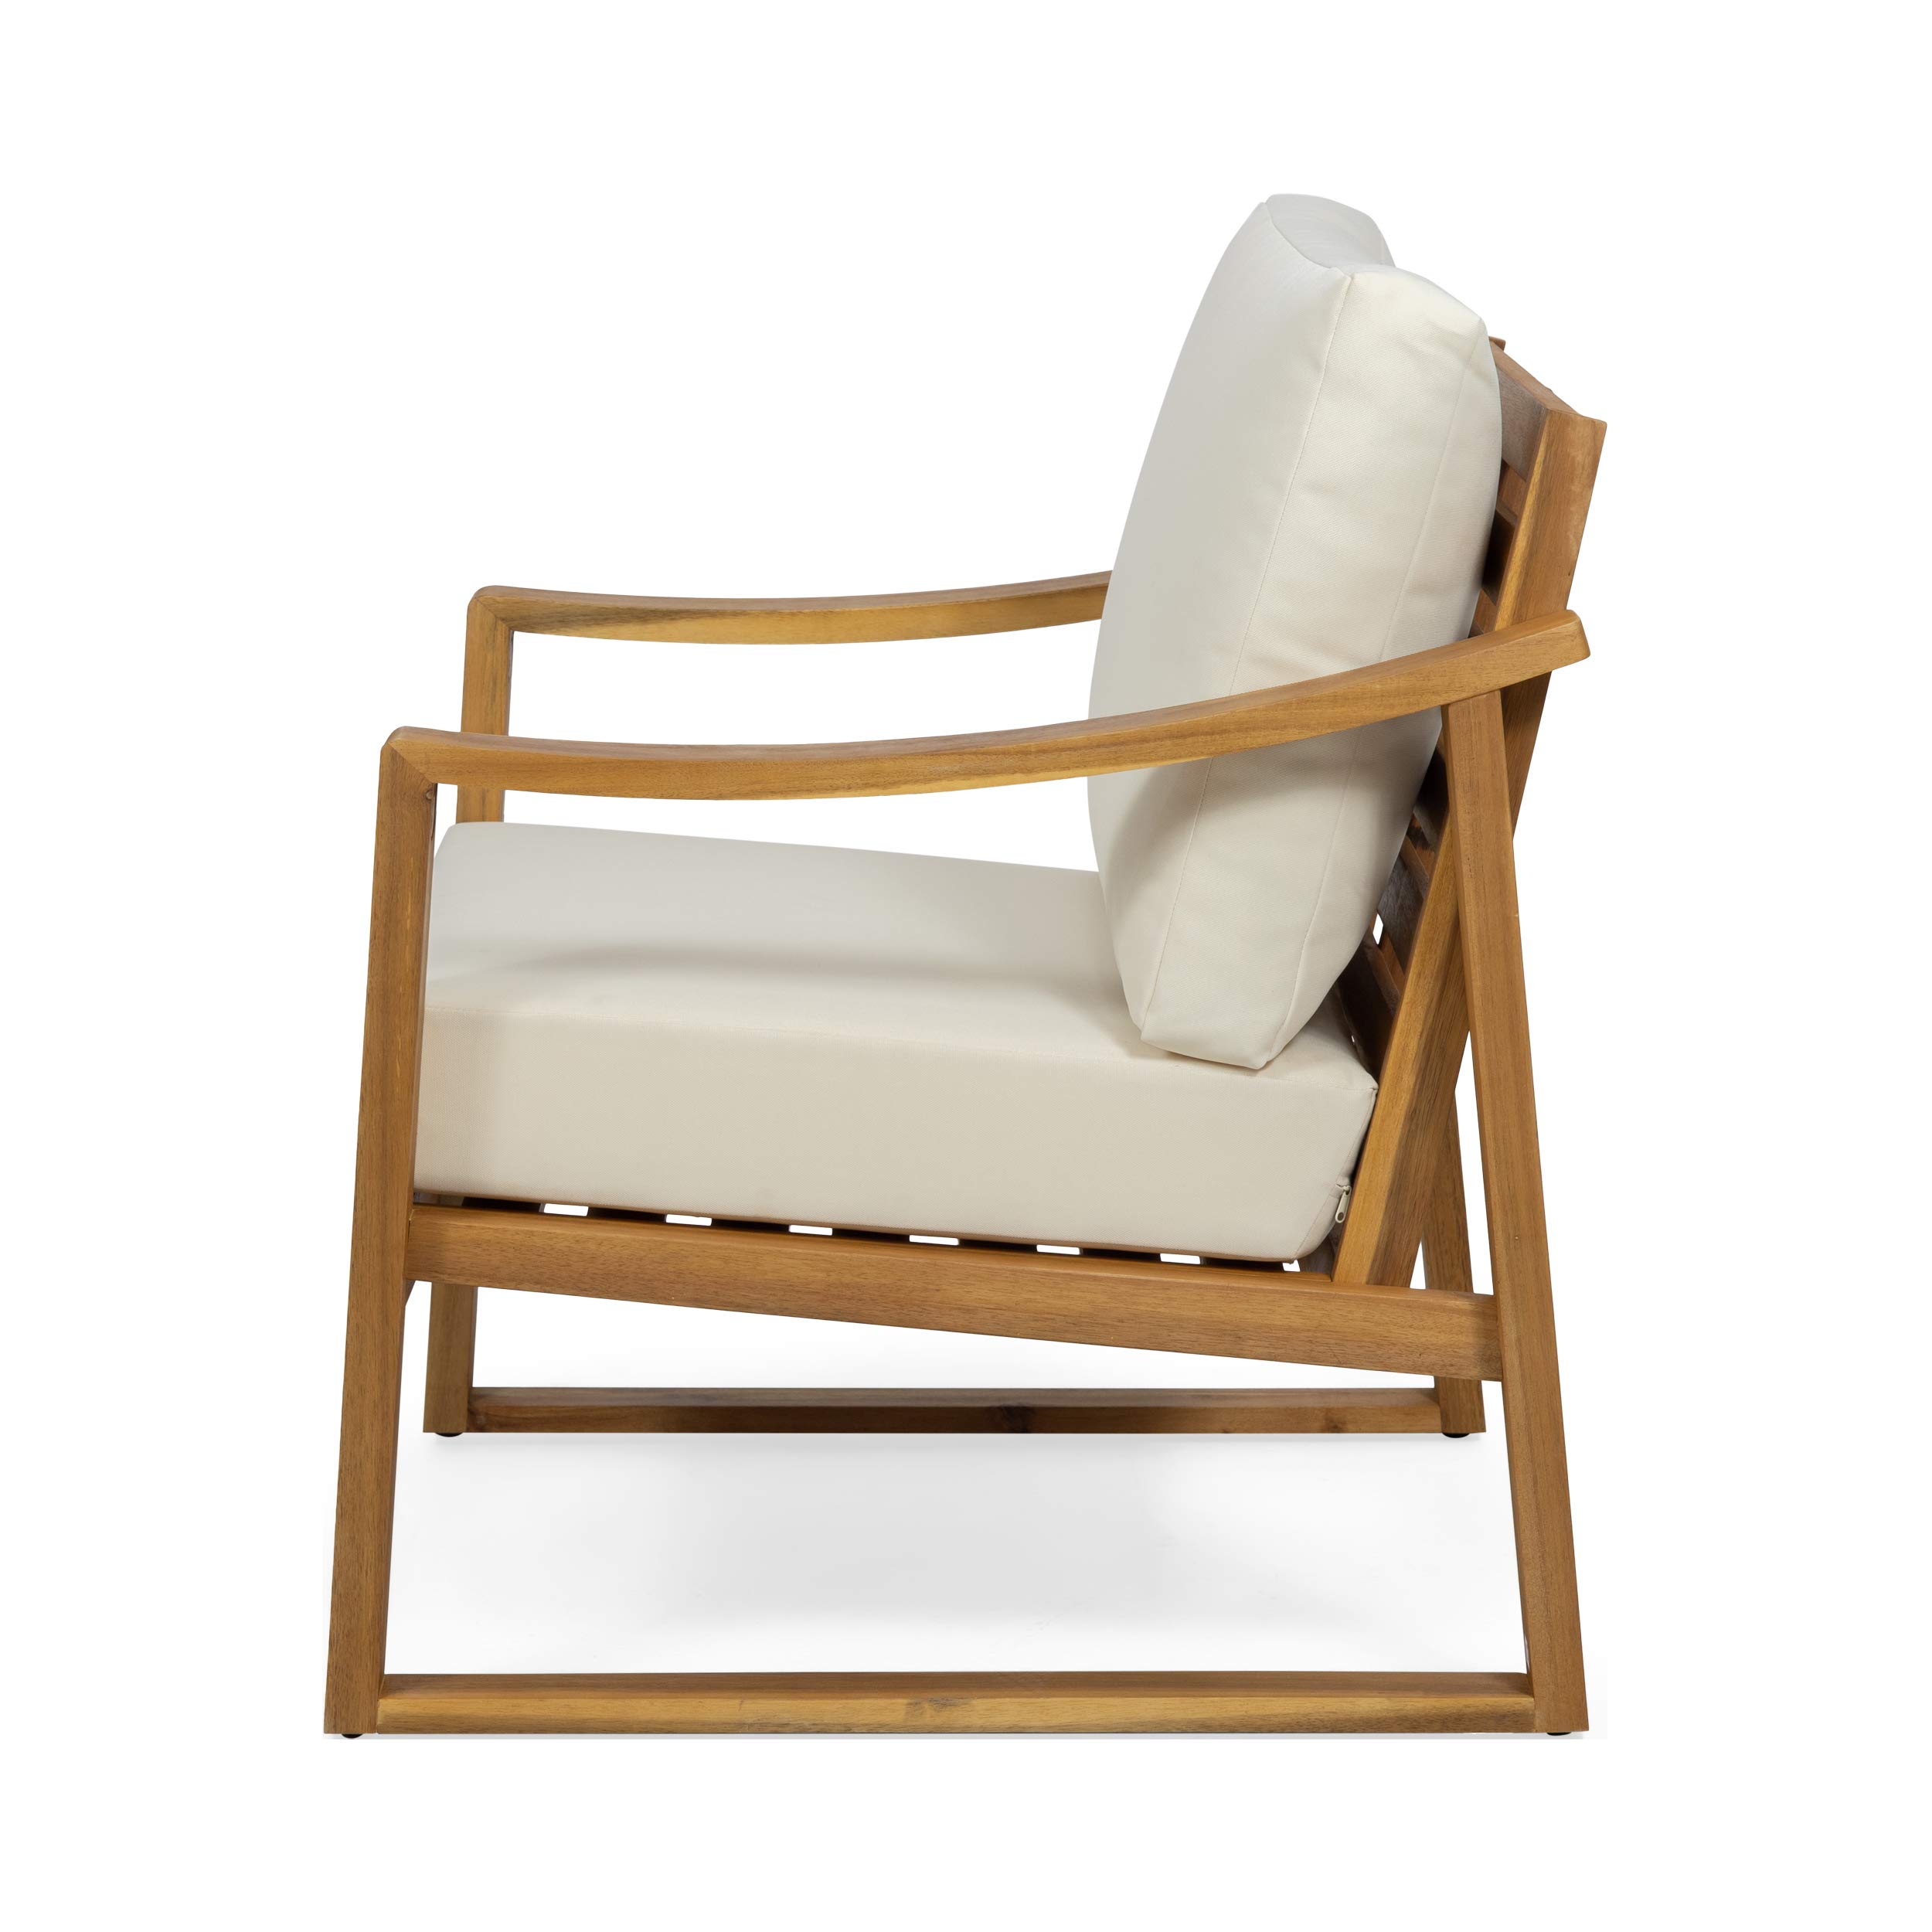 Christopher Knight Home Adolph Outdoor Acacia Wood Club Chairs with Water Resistant Cushions, Teak and Beige